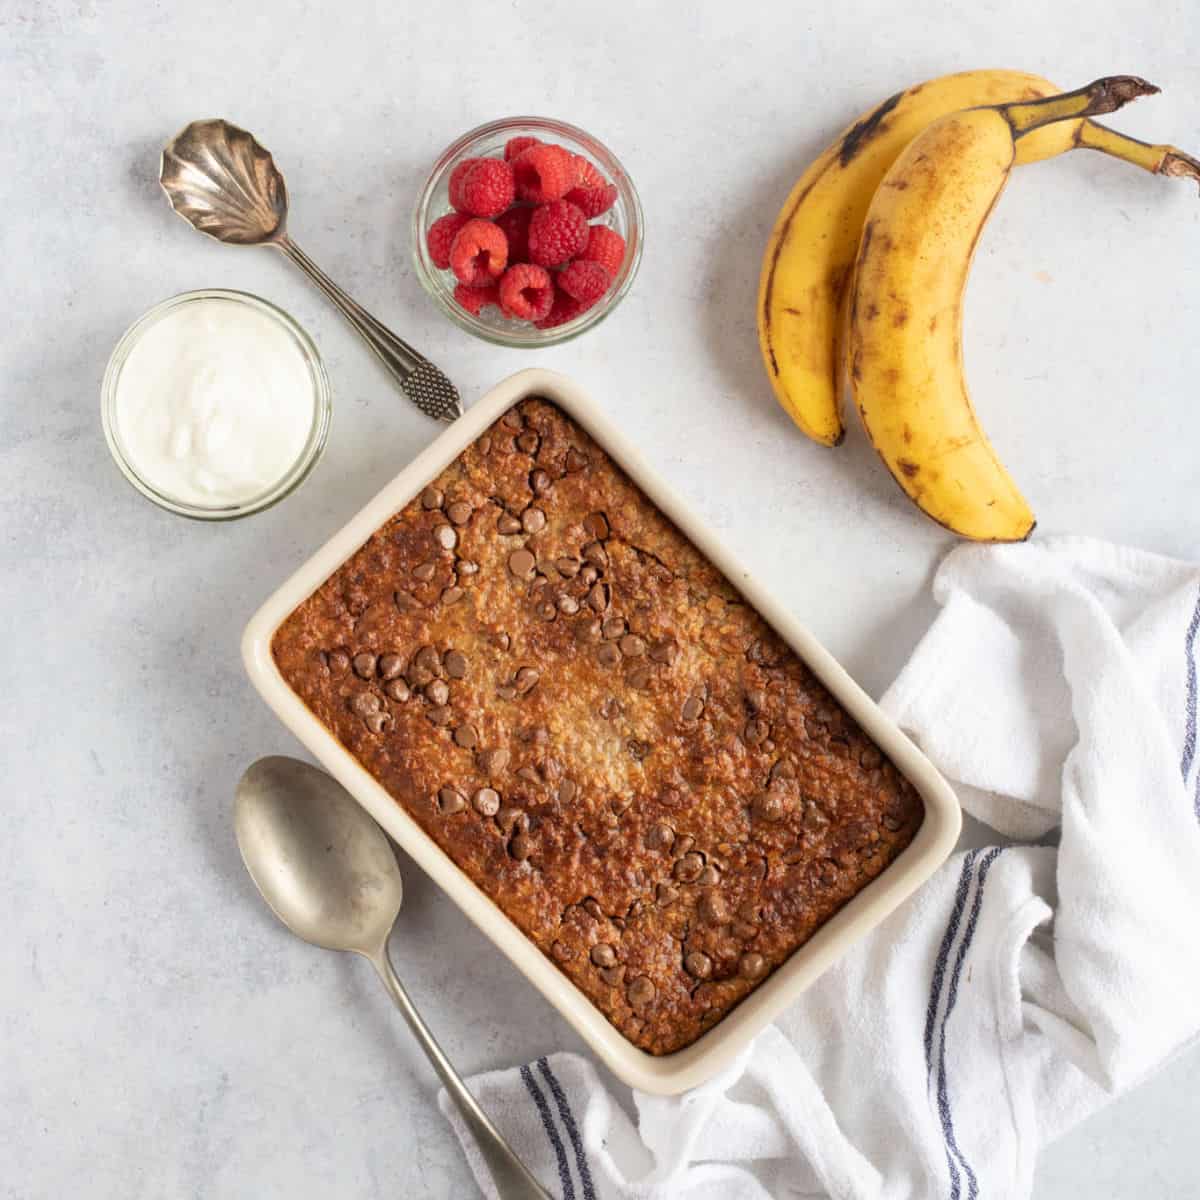 Baked oats with yogurt and berries.